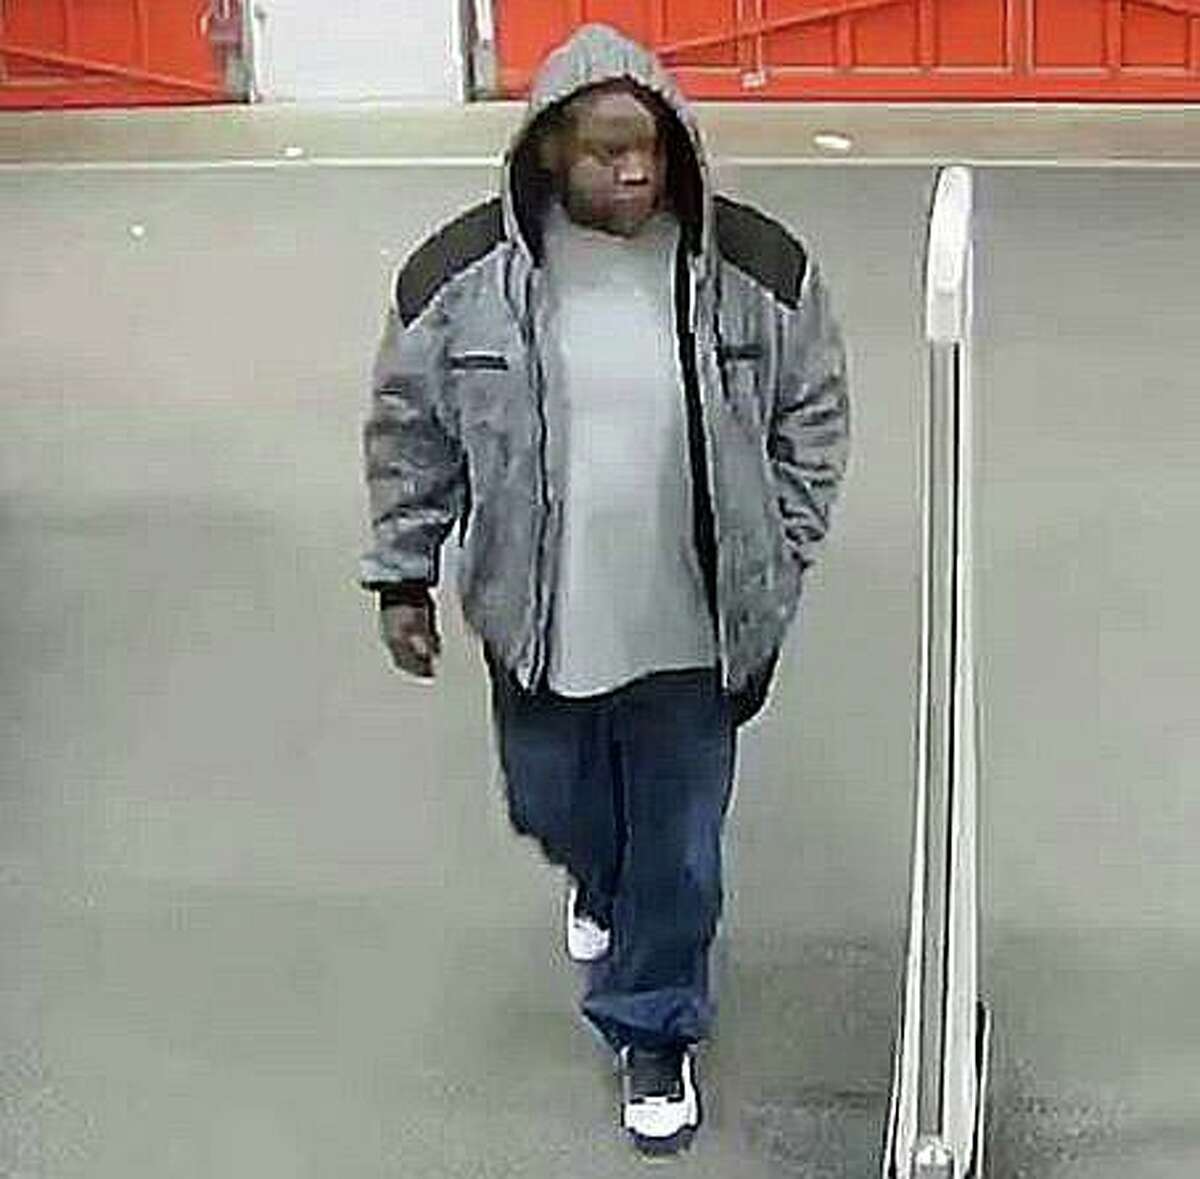 North Haven police are asking the public’s help identify a man who stole a a nearly $1,000 Samsung TV from BJ’s Wholesale. The theft happened around 7 p.m. on Wednesday, March 4, 2020.